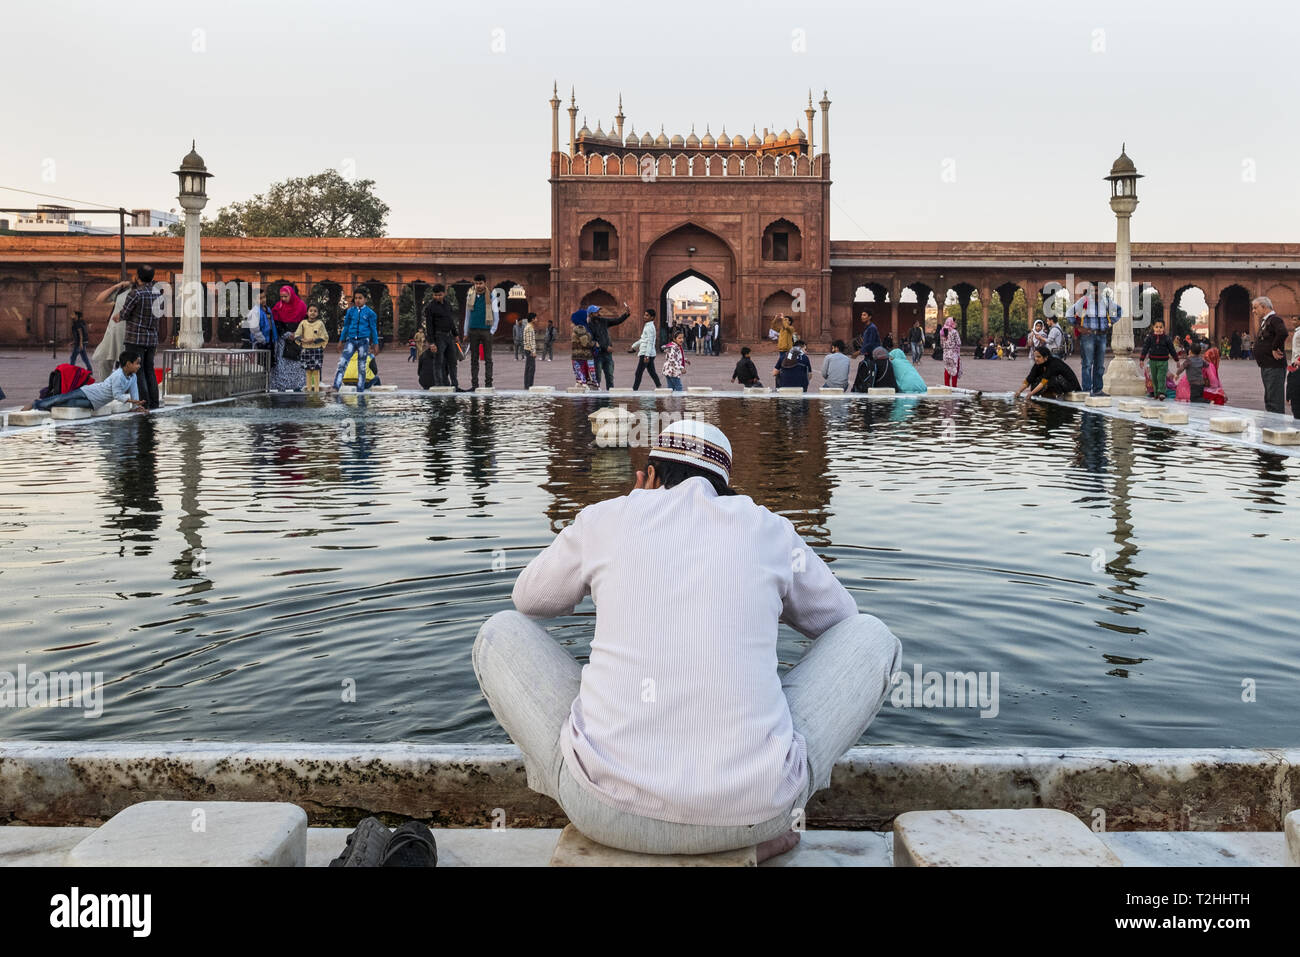 Muslim man washing hands and feet before prayer time, Jama Masjid, one of the largest mosques in India, South Asia Stock Photo